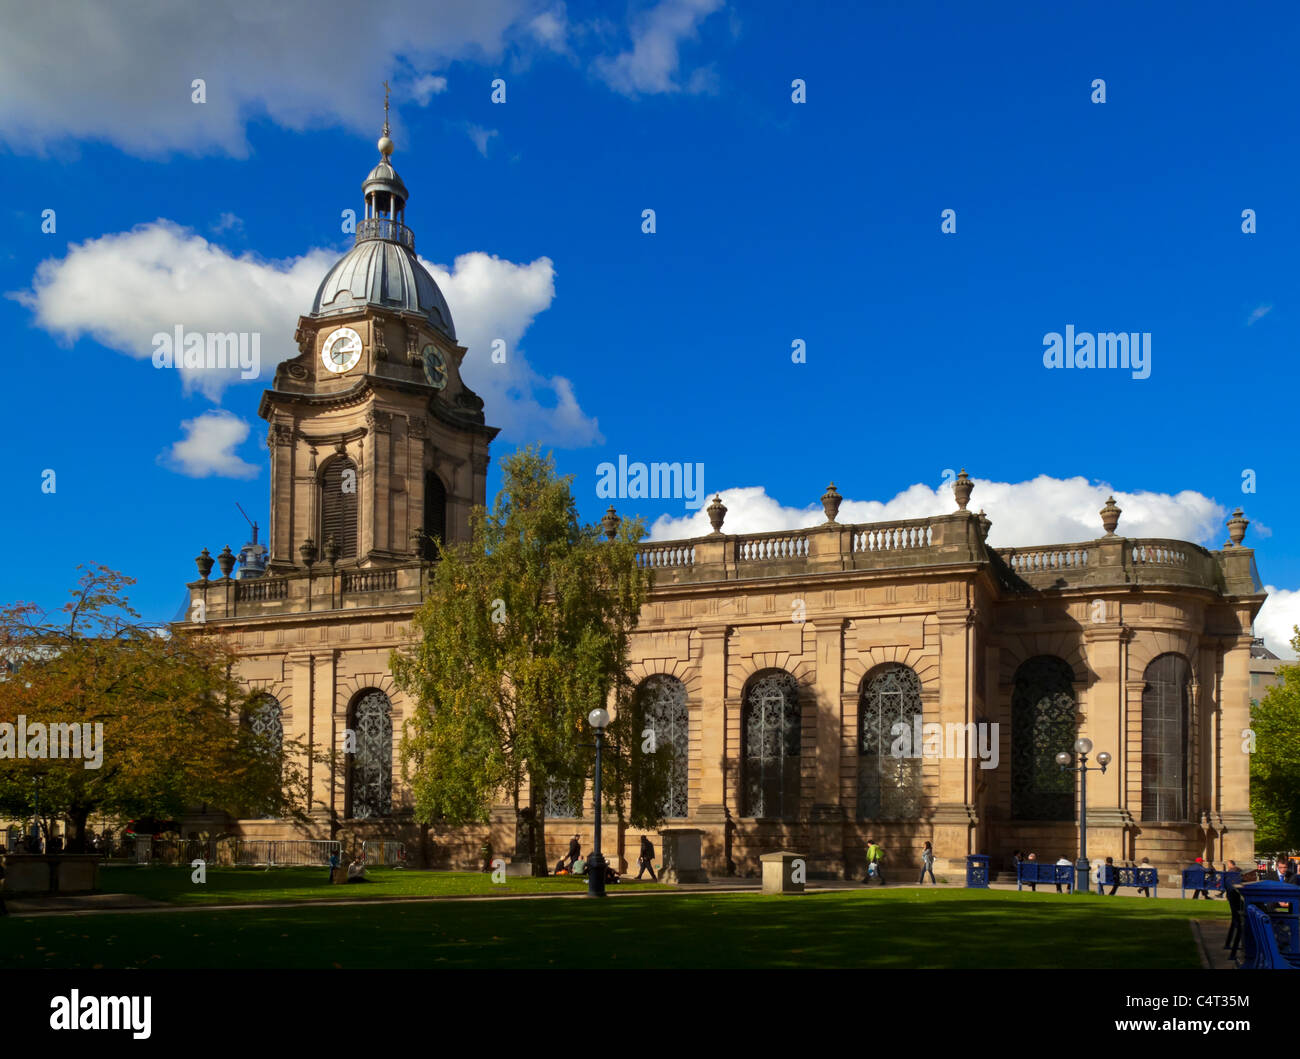 The Cathedral Church of St Philip in Birmingham England built in early 18th century Baroque style and designed by Thomas Archer Stock Photo